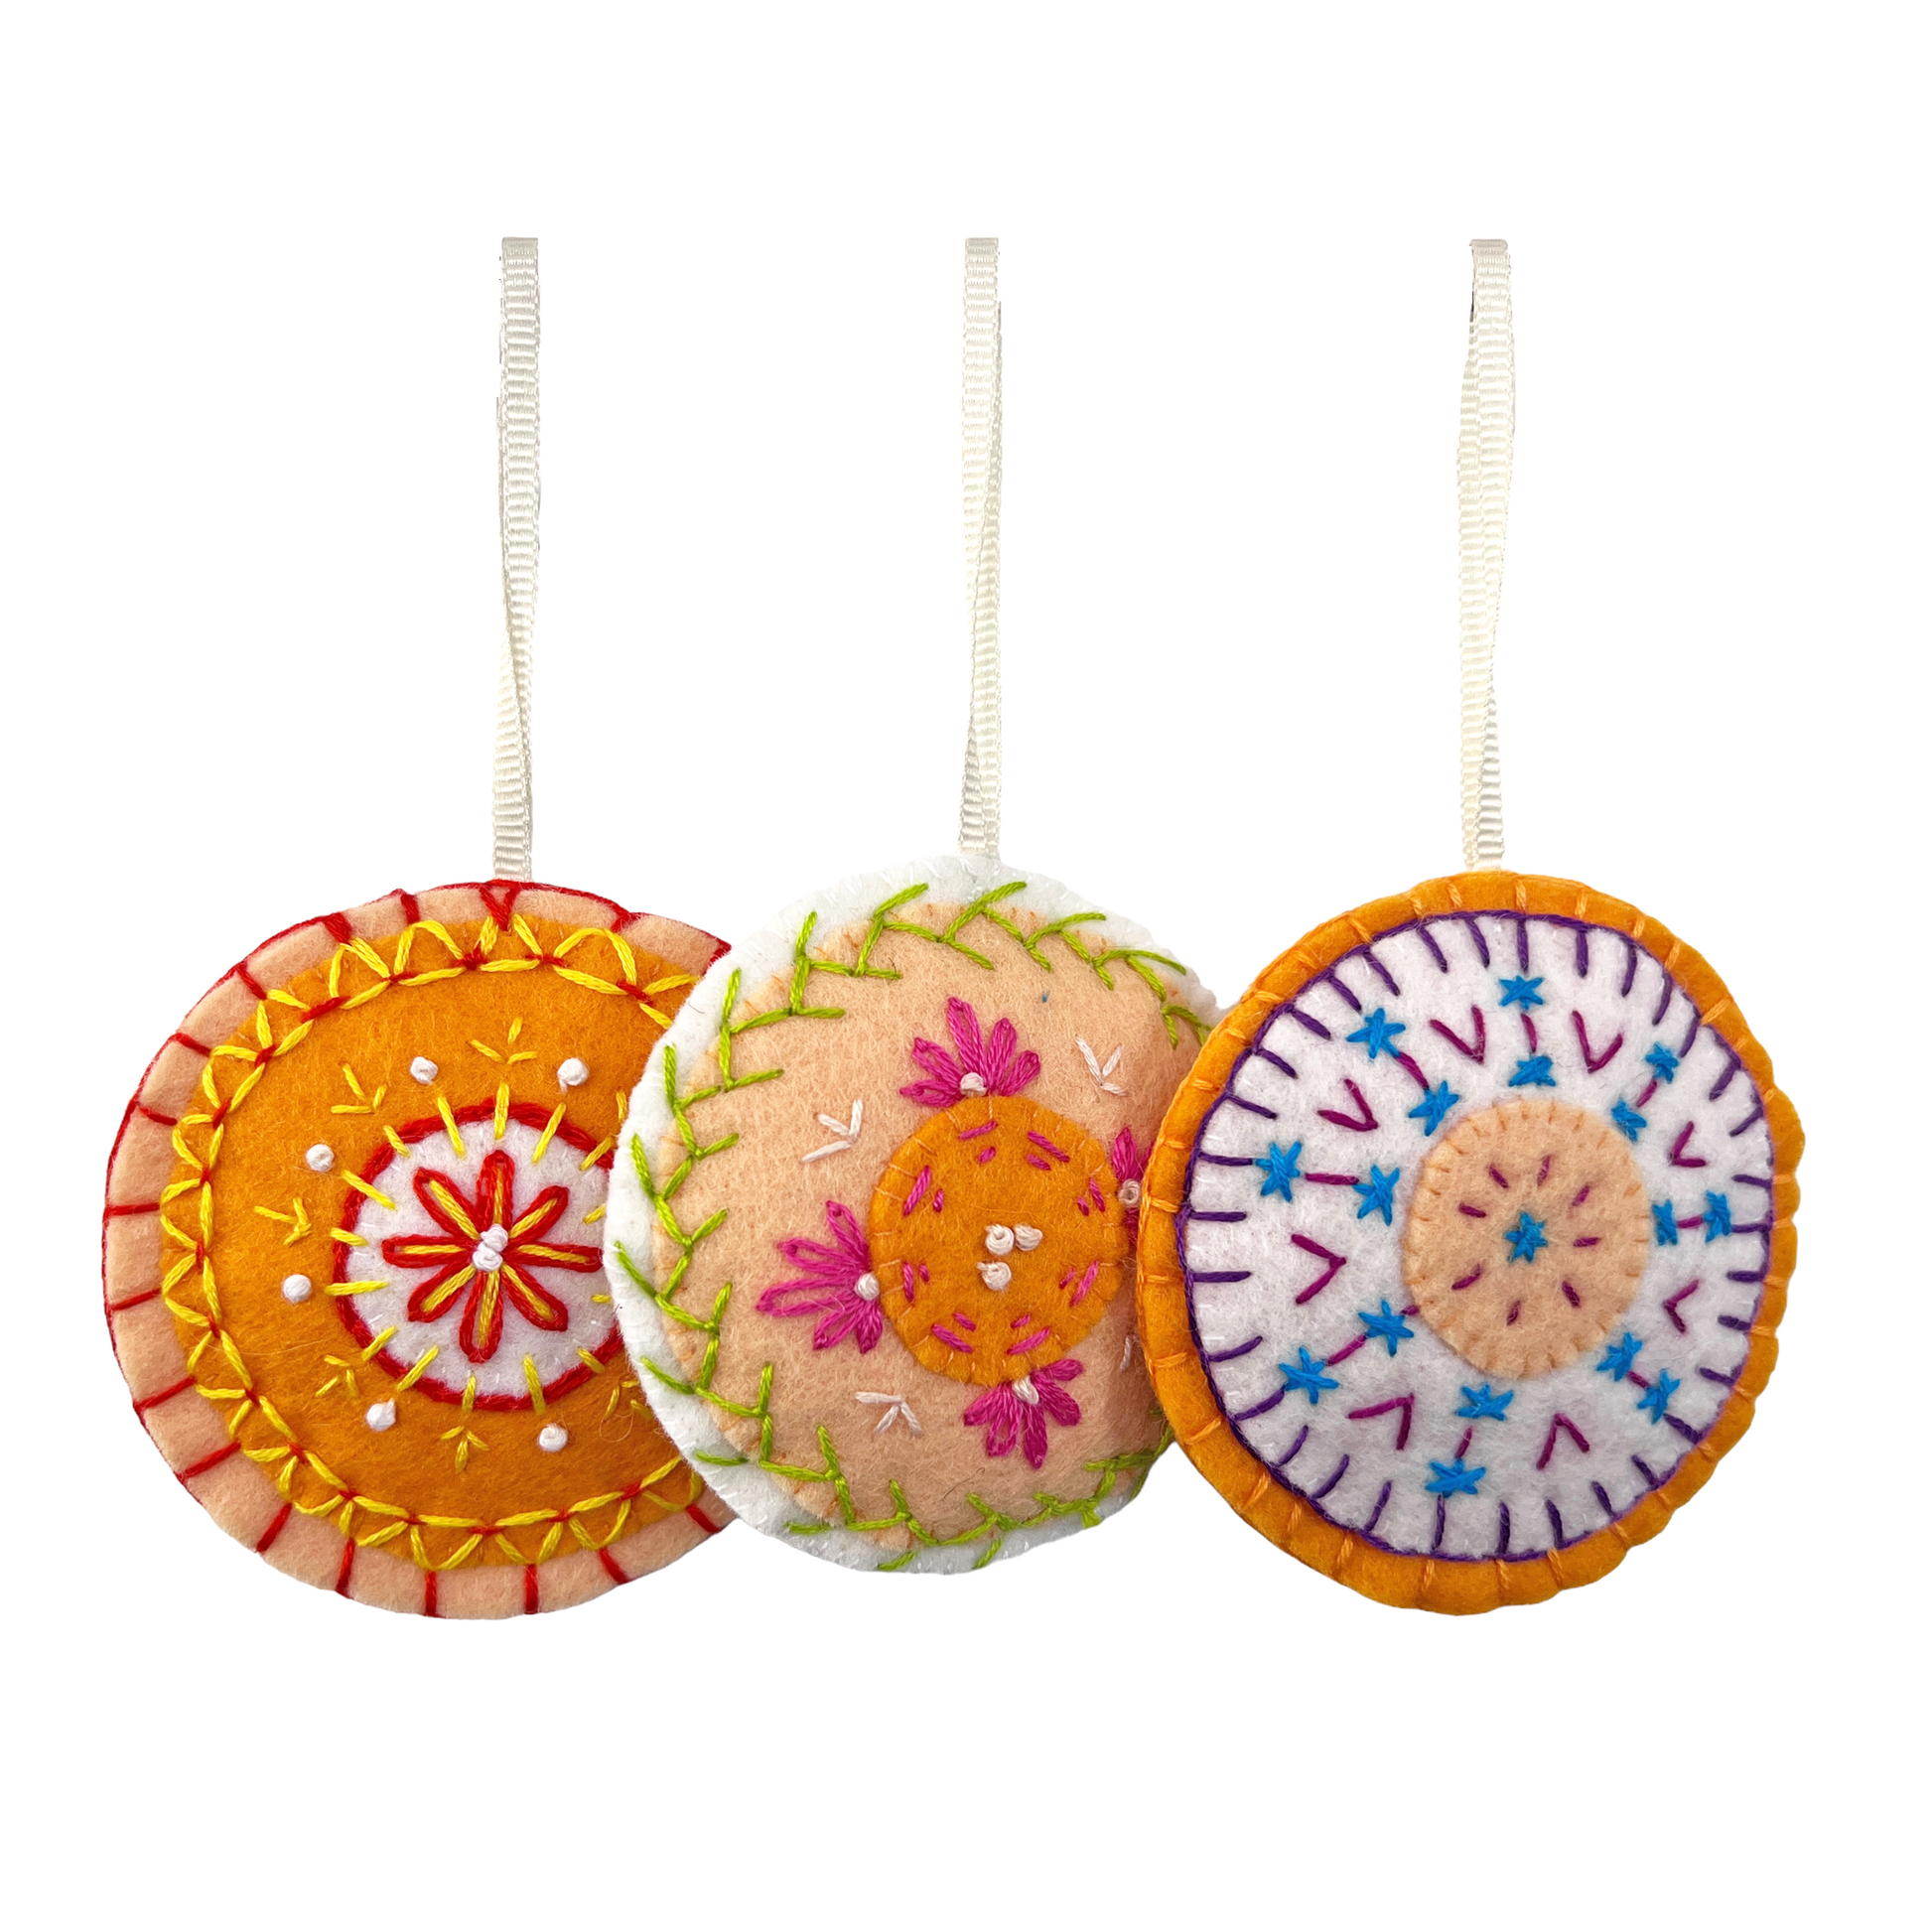 Each Mini Mandala ornament is unqiue. Pictured here are three 100% wool felt, hand-stitched ornaments in varied colors.